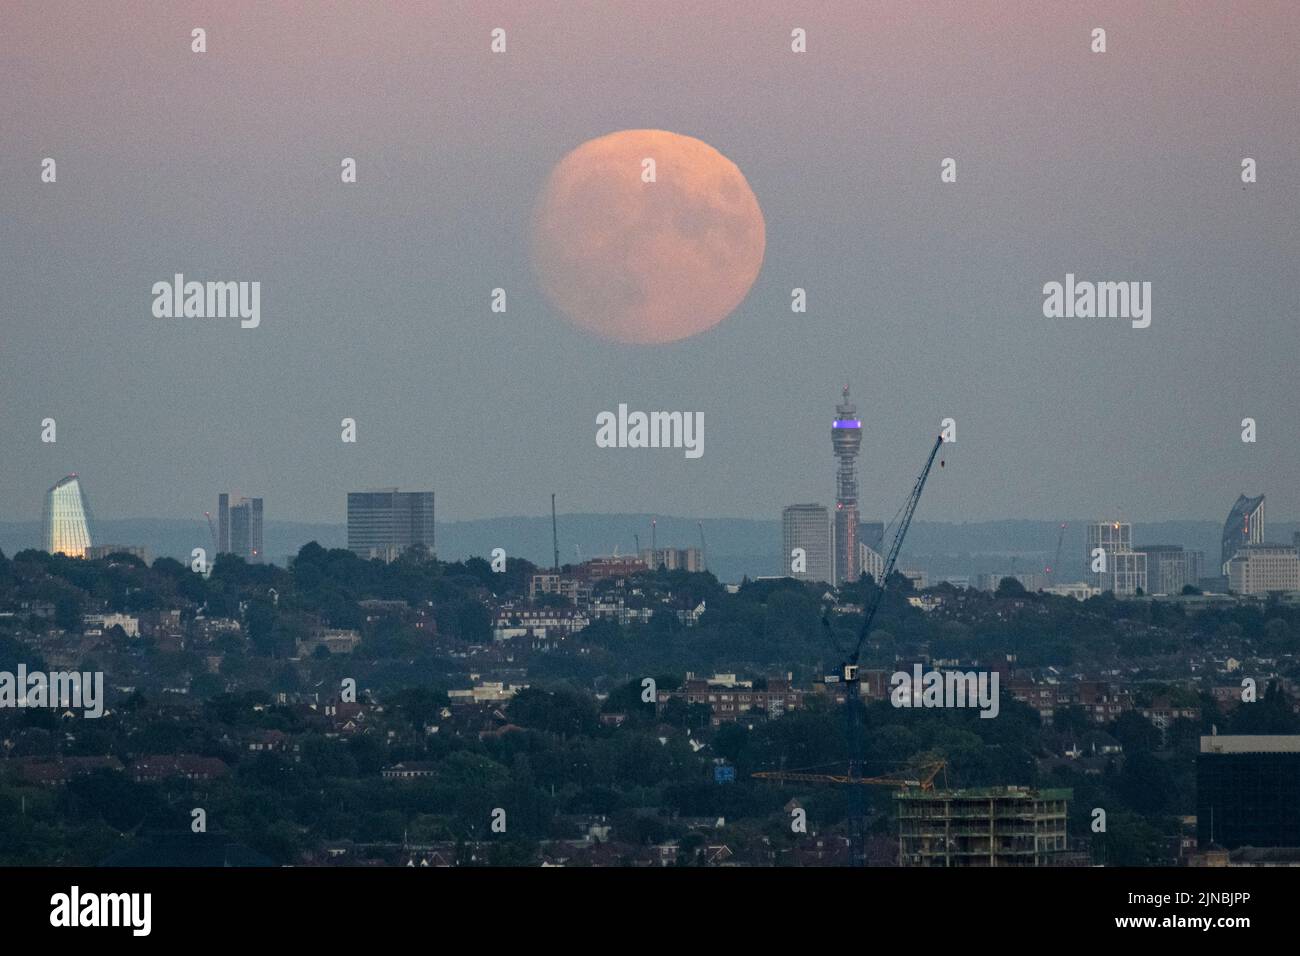 London, UK.  10 August 2022.  UK Weather – A 97.1% waxing gibbous moon rises through a layer of smog over the BT Tower and skyline of the capital.  According to The Old Farmer’s Almanac, August’s full moon (at 02:35 on 12 August) is called the Sturgeon Moon because of the large number of sturgeon fish that were found in the Great Lakes in North America at this time of year.  August’s full moon is also known as a ‘supermoon’ appearing brighter and larger as it will be at its closest point to the Earth in its orbit, known as the perigee. Credit: Stephen Chung / Alamy Live News Stock Photo